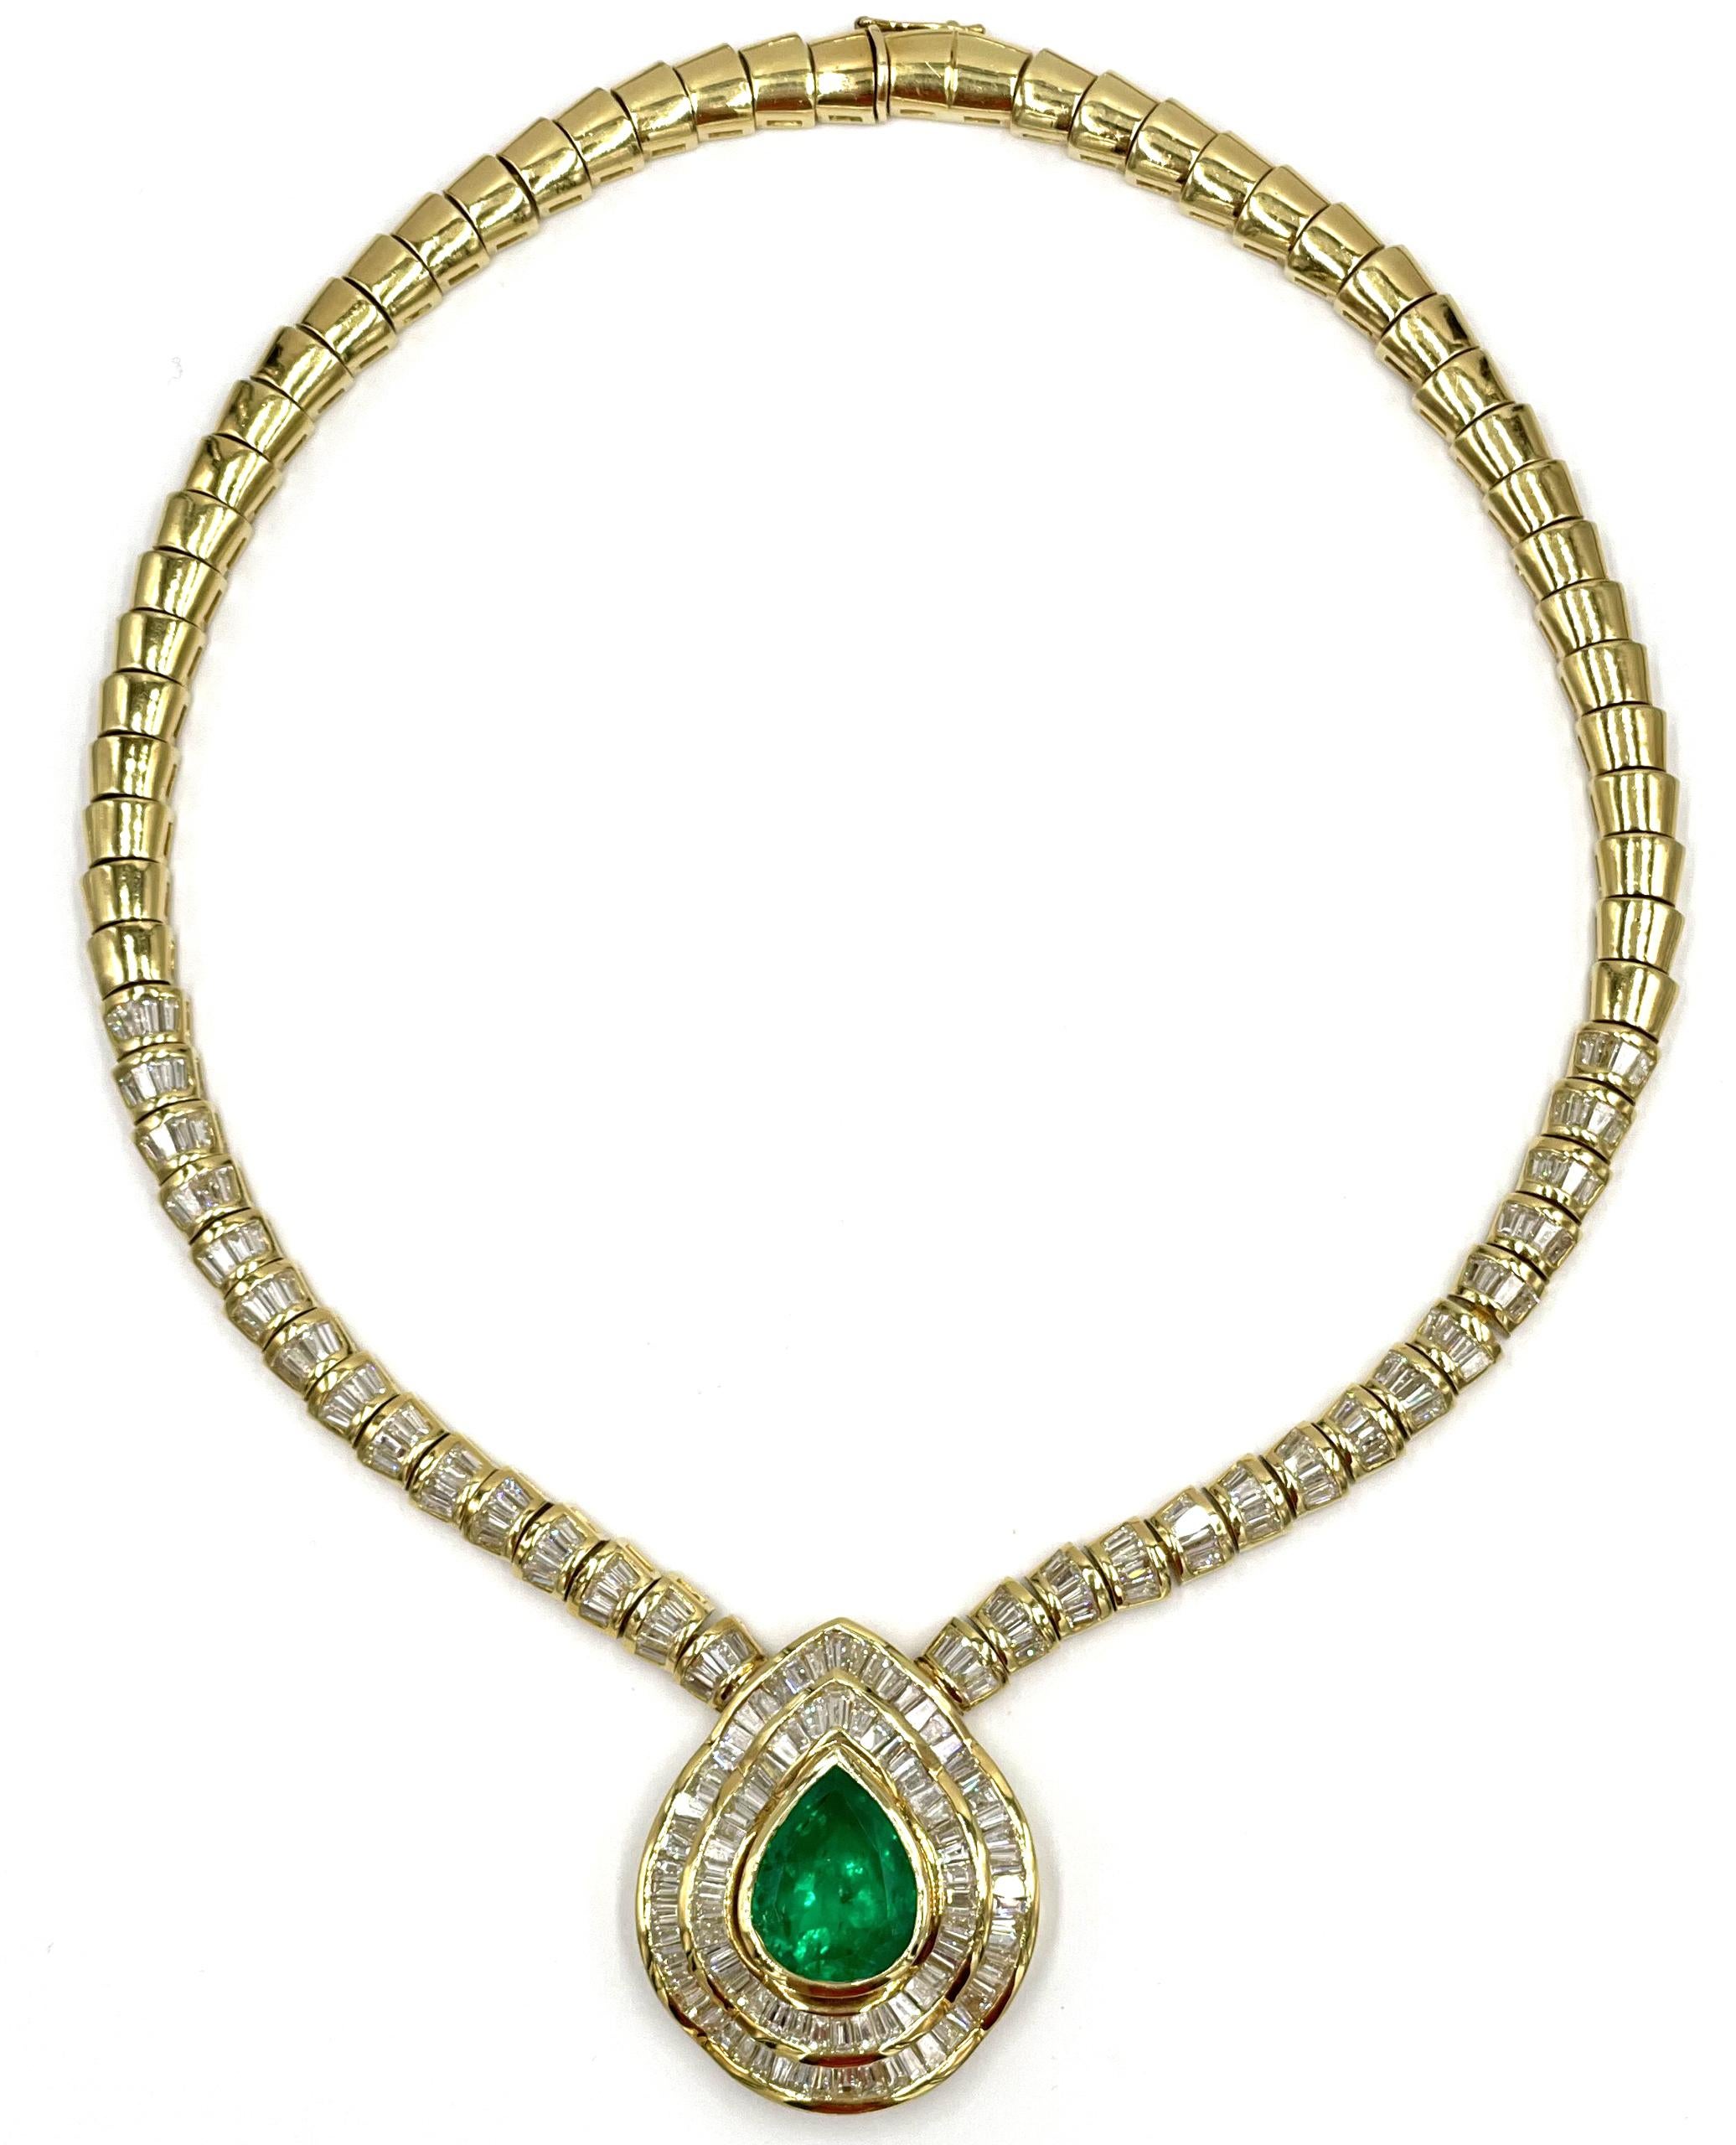 Exquisite red carpet 18K yellow gold necklace made circa 1985 features one GIA certified pear shape Colombian emerald weighing 18.44 carats and 217 baguette diamonds weighing 19.06 carats (H color, VS clarity).

-Length: 17 inches 
-Total weight: